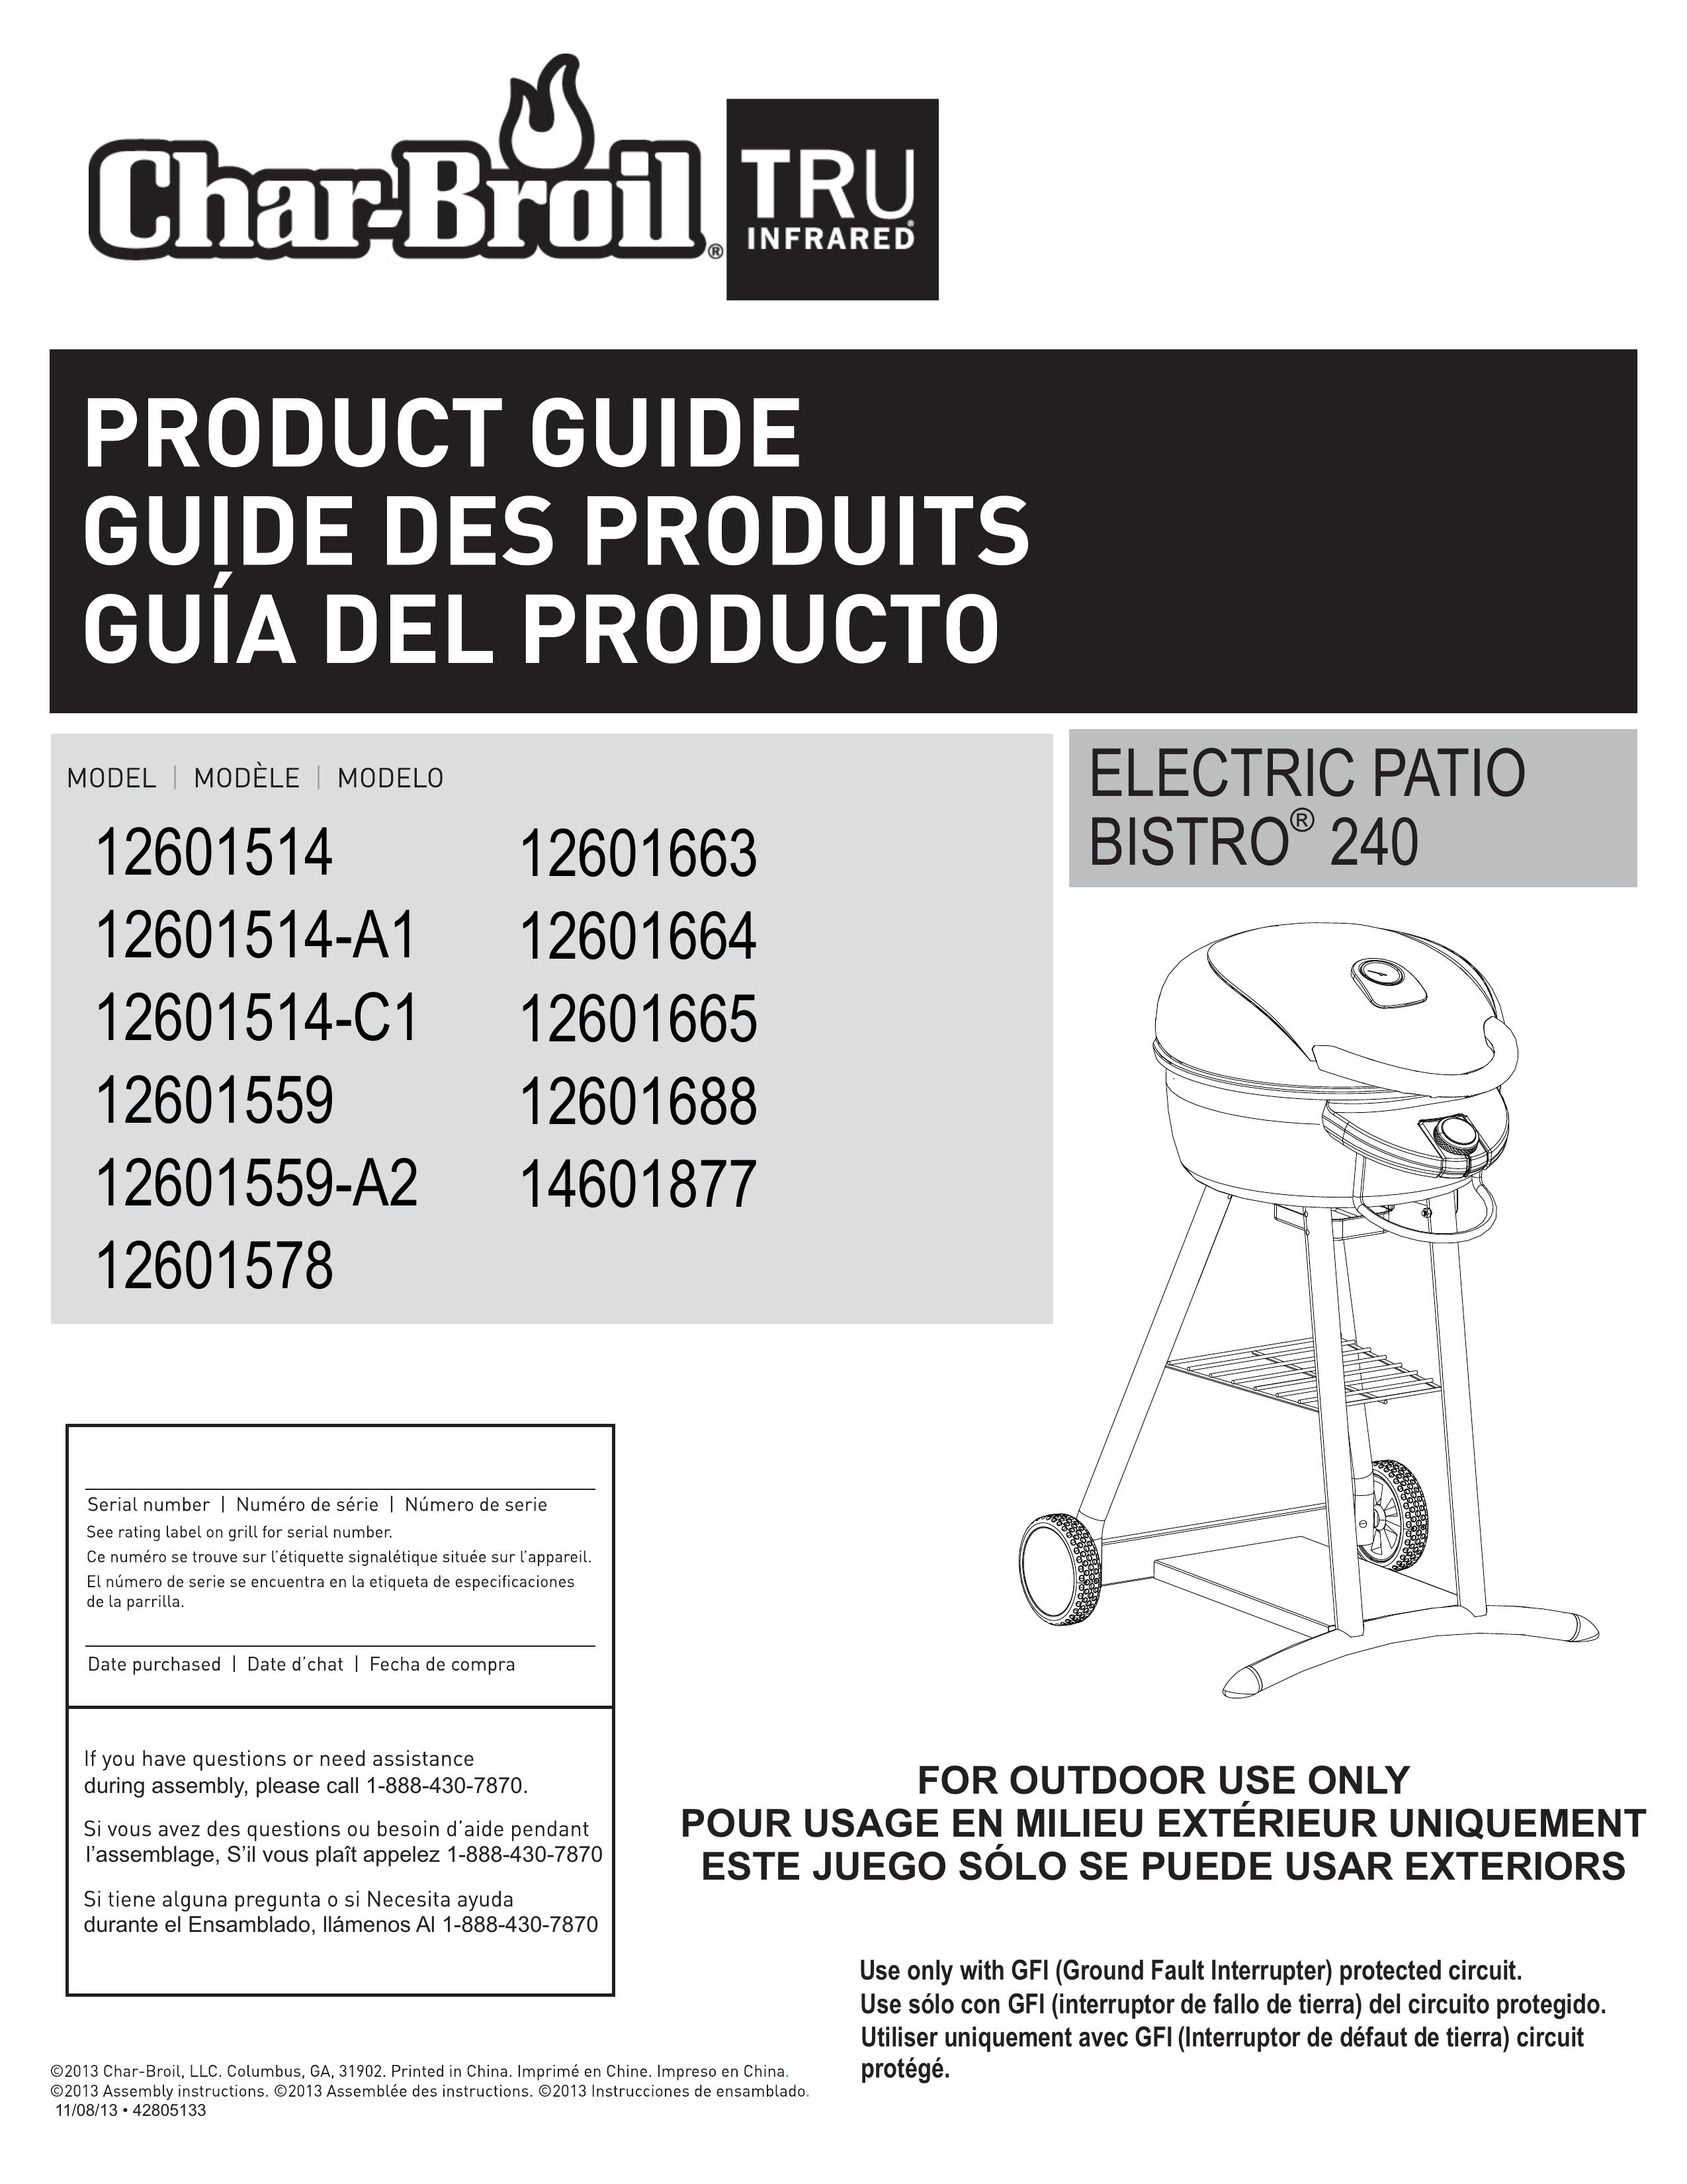 Char-Broil 12601578 Electric Grill User Manual